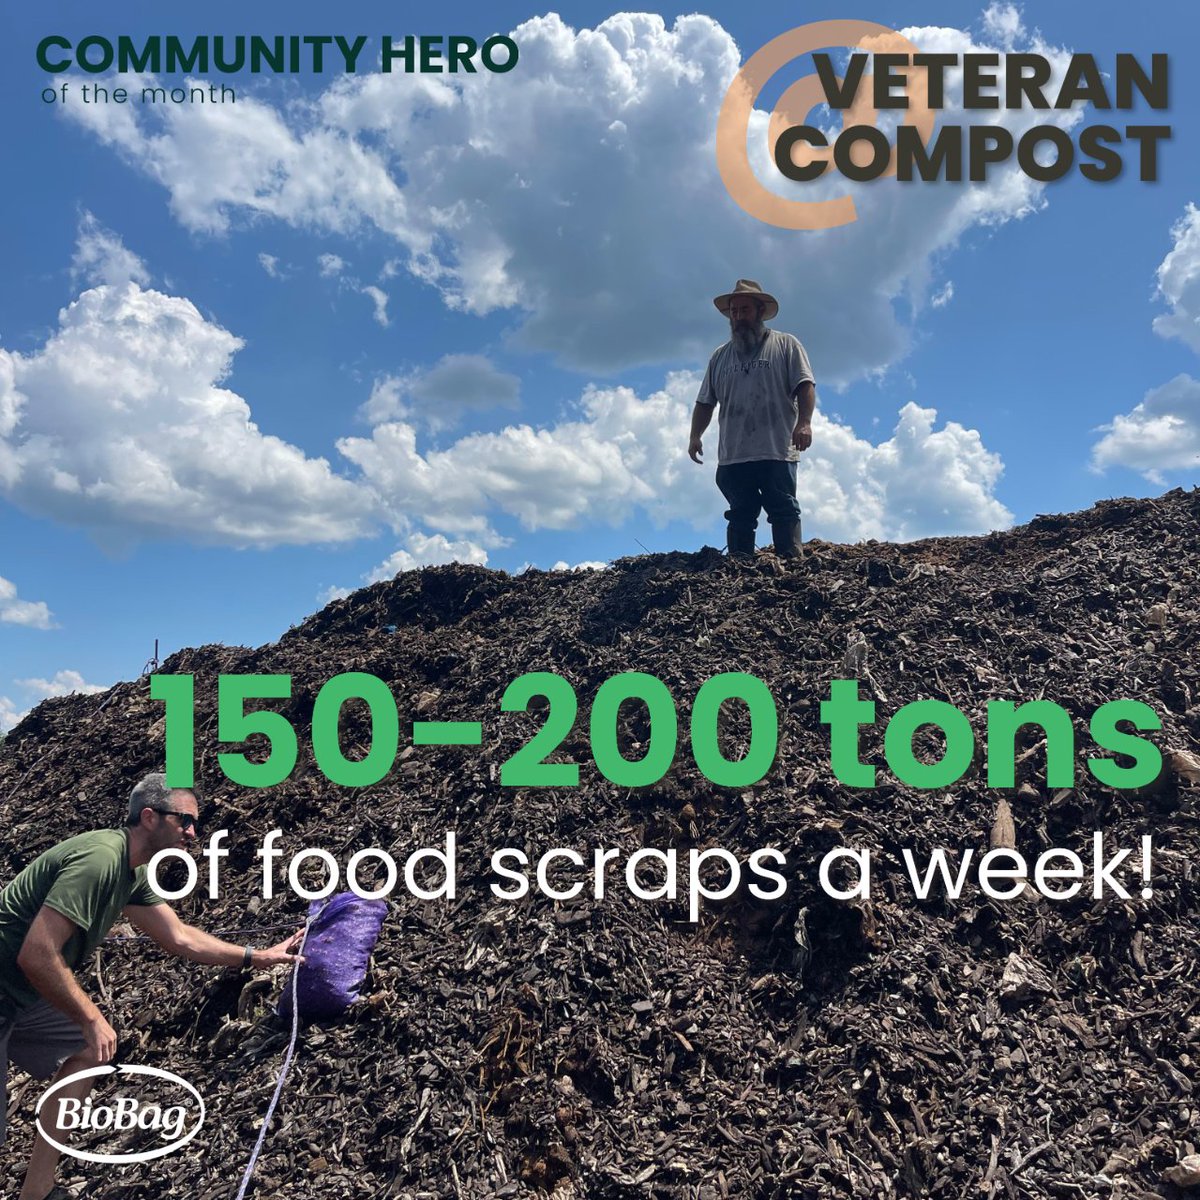 Highlighting Veteran Compost for our Community Hero of the Month! This team of 25 is staying busy in the DMV area as they're handling around 150-200 tons of food scraps a week! Keep up the good work! #greencommunities #composting